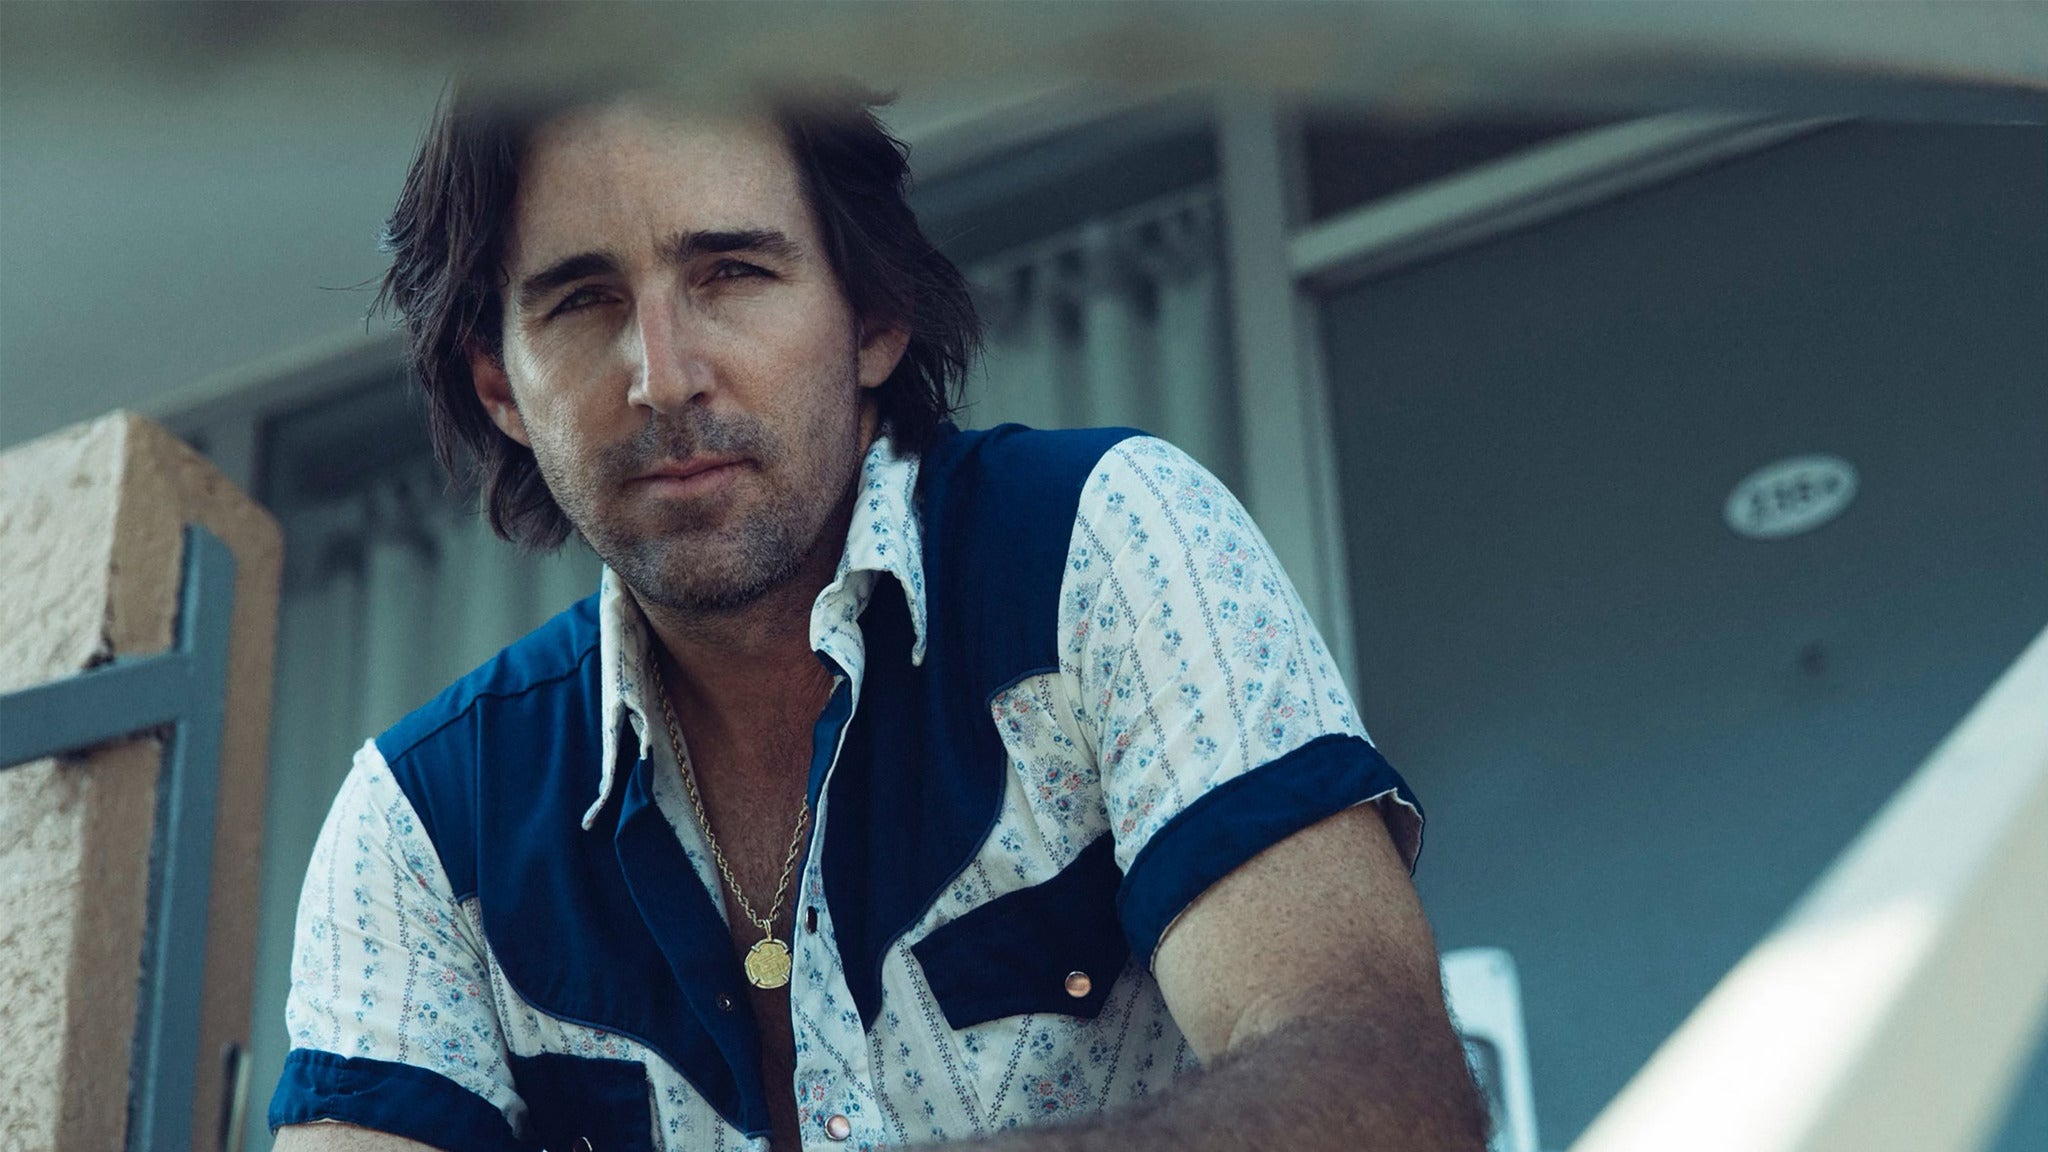 Jake Owen: Up There Down Here Tour presale password for event tickets in Youngstown, OH (The Youngstown Foundation Amphitheatre)